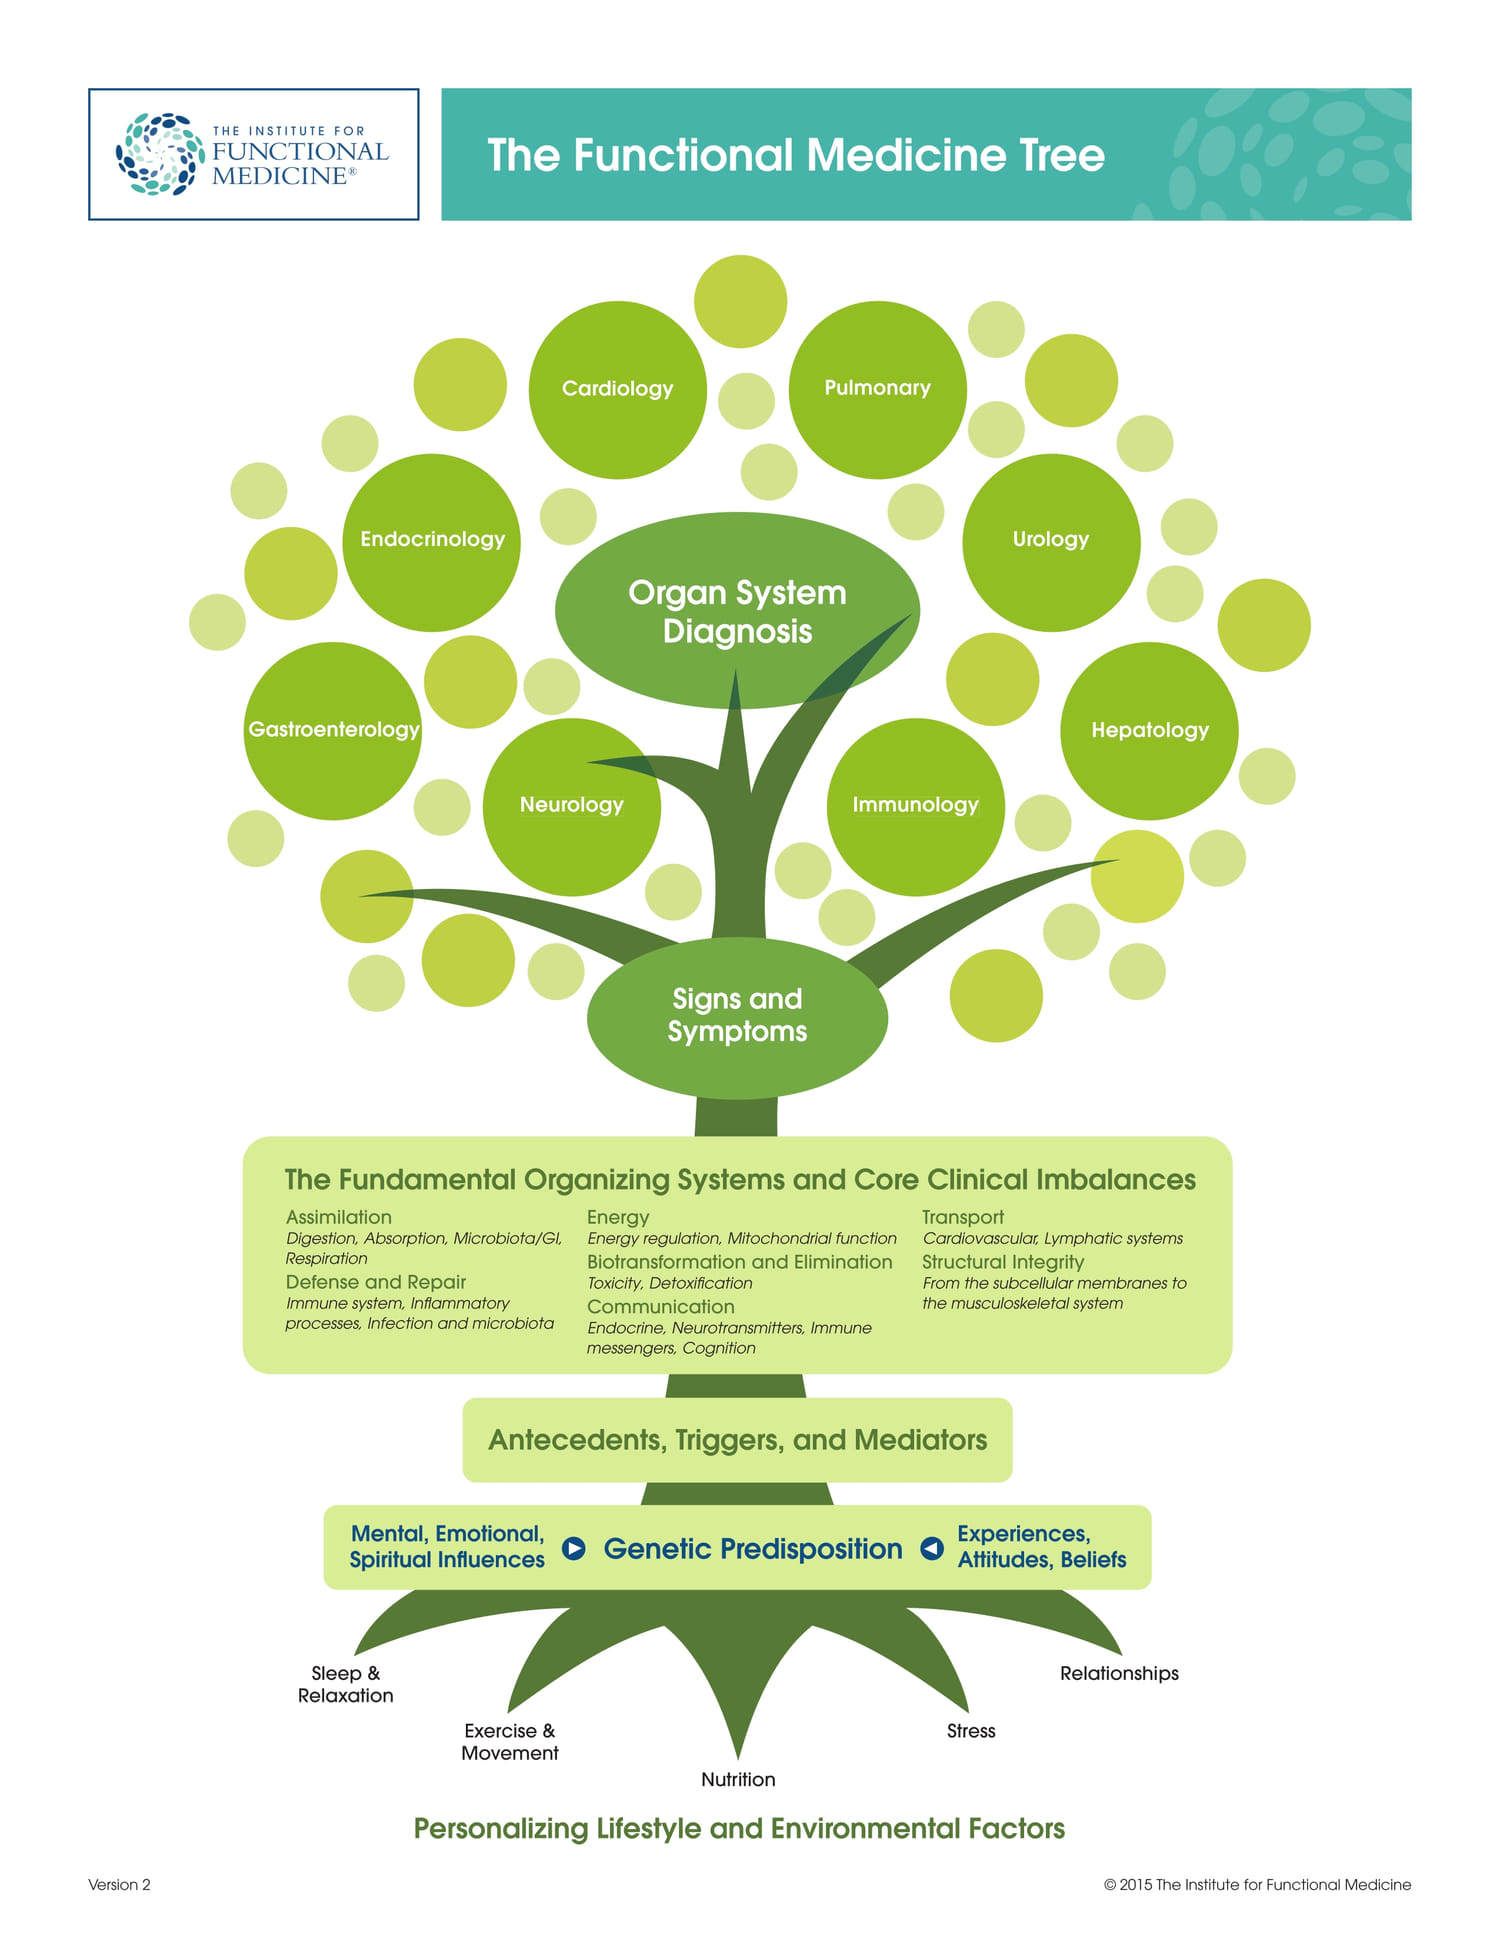 The Functional Medicine Tree. Personalizing Lifestyle and Environmental Factors.